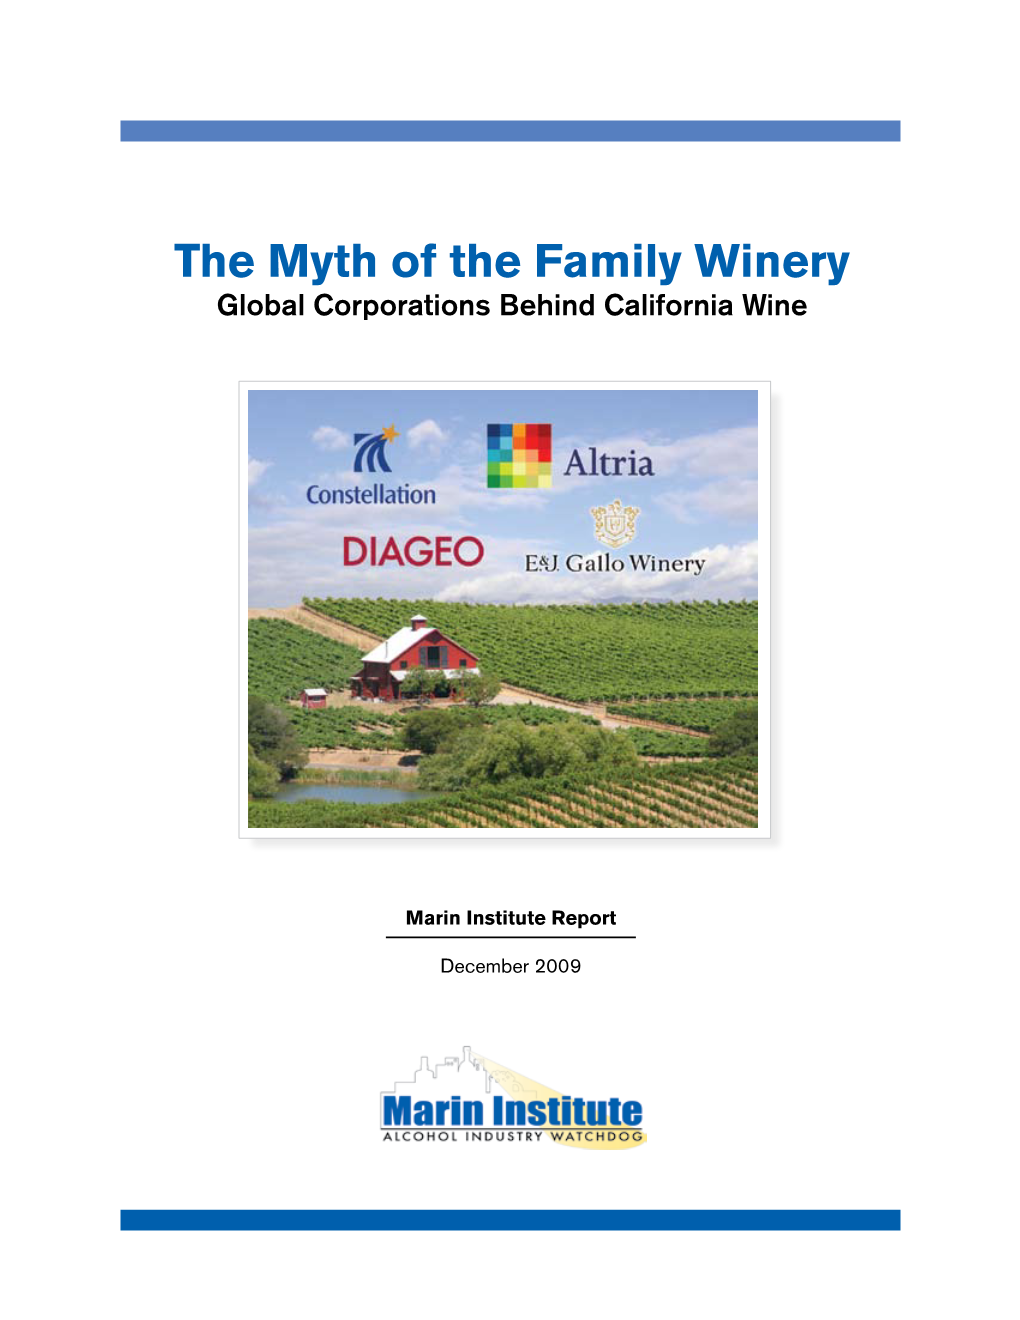 The Myth of the Family Winery: Global Corporations Behind California Wine